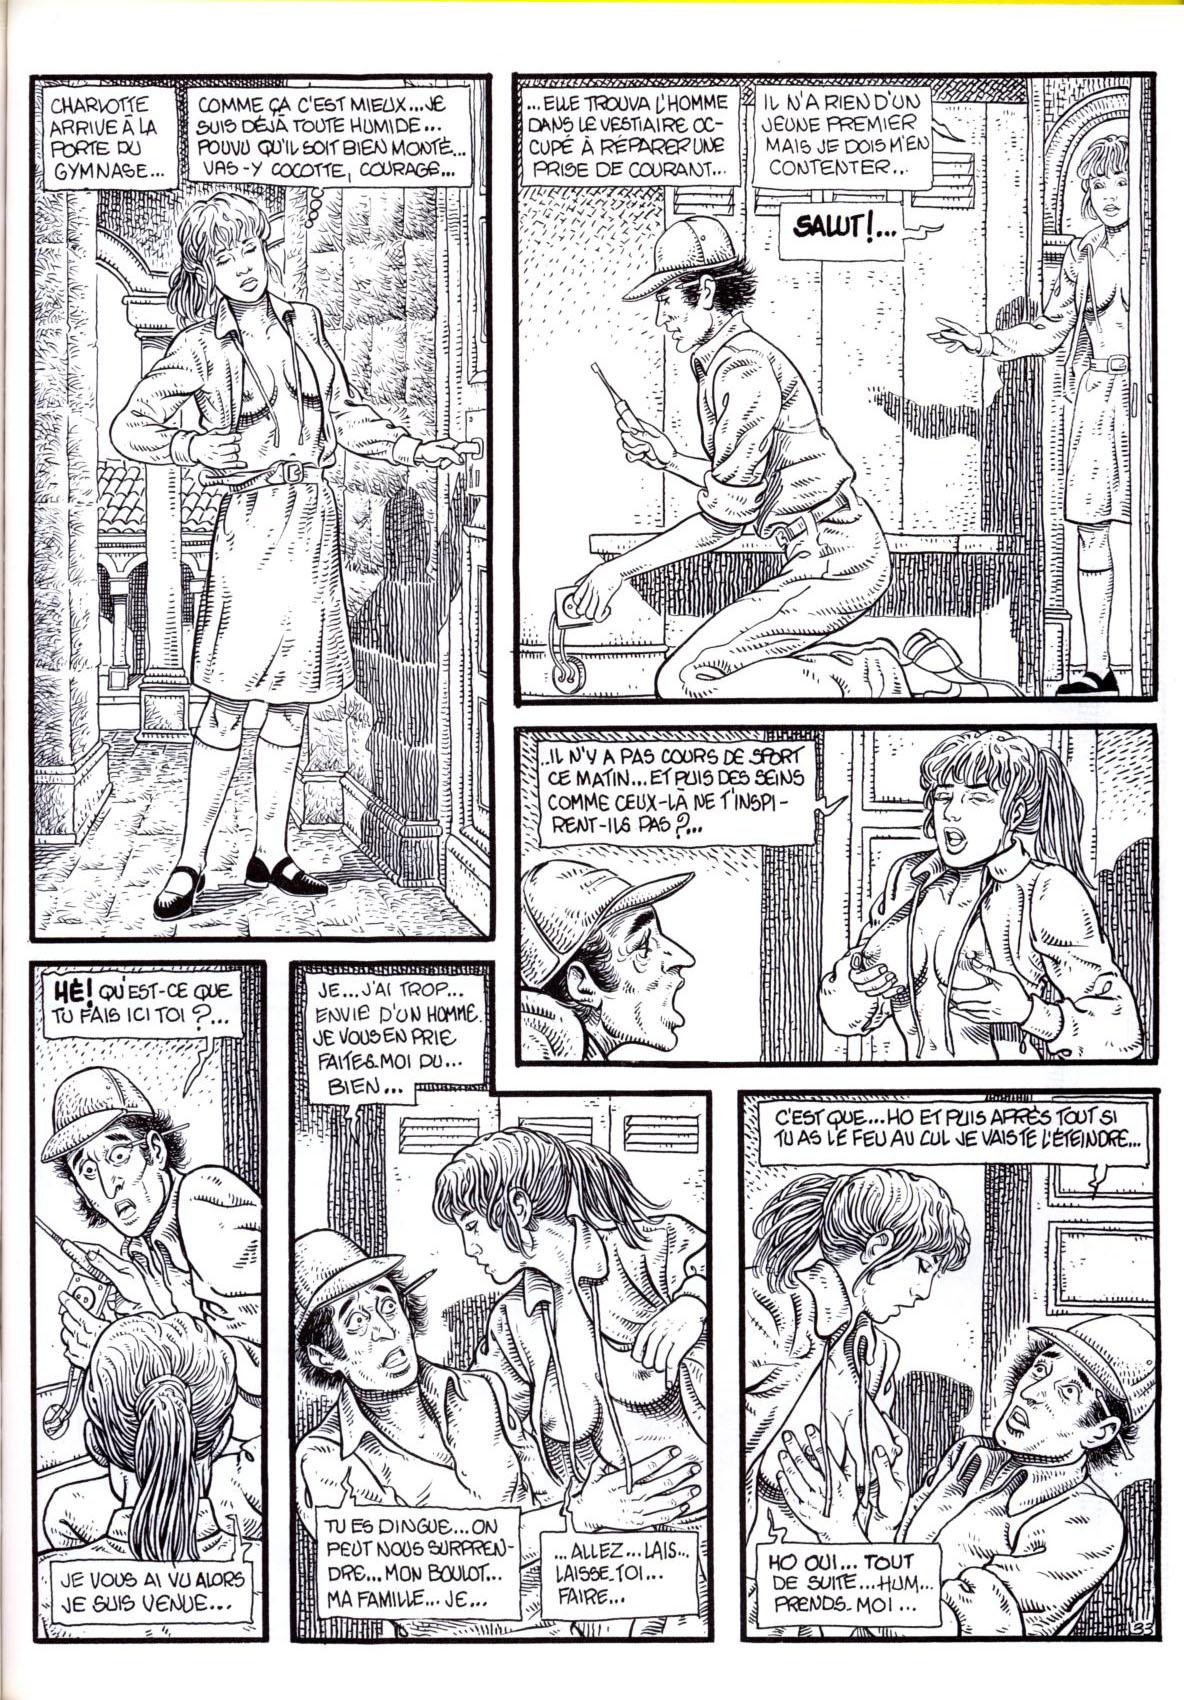 The Mary Magdalene Boarding School - Volume 3 numero d'image 35